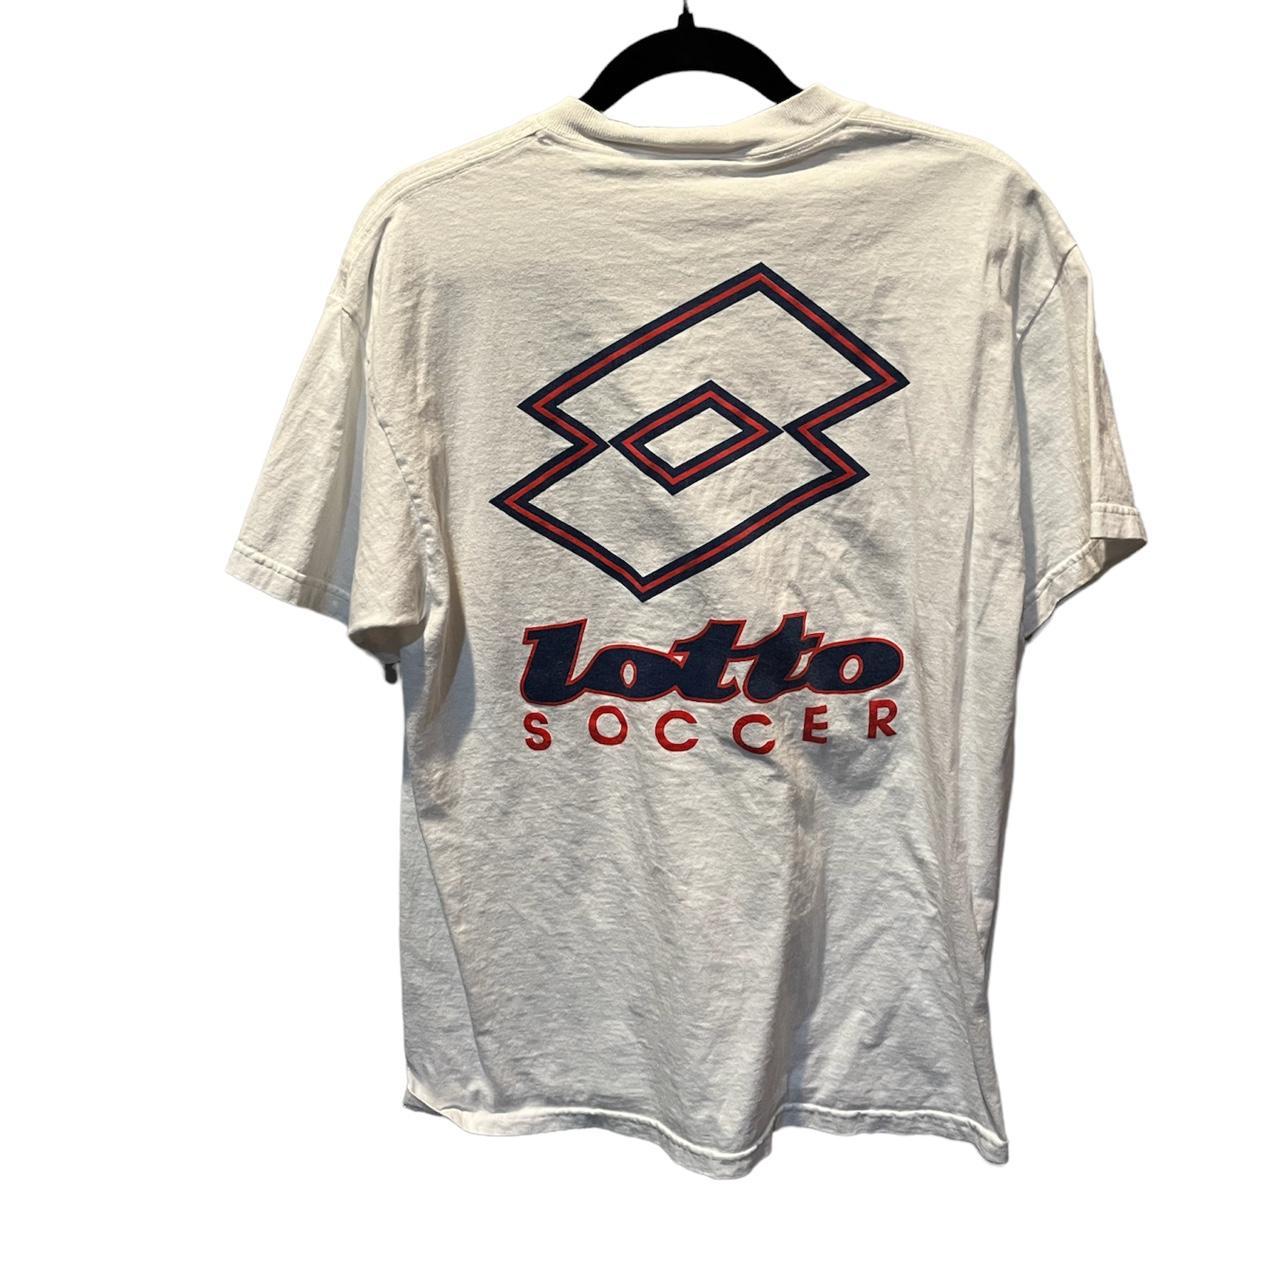 Lotto Men's White and Red T-shirt (2)